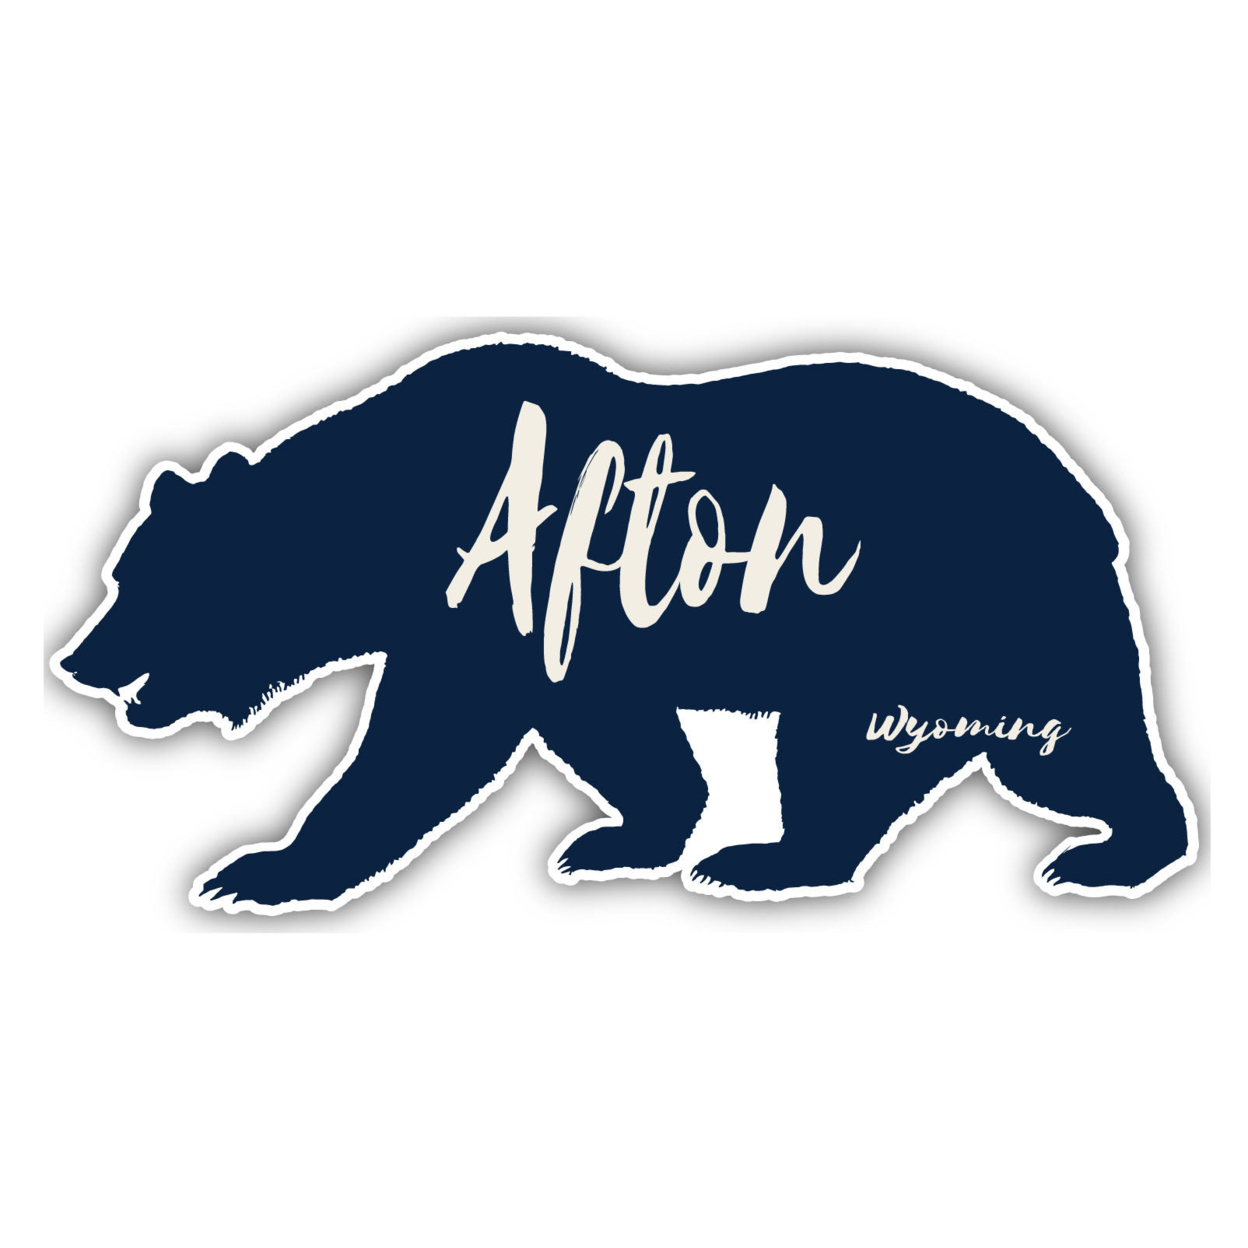 Afton Wyoming Souvenir Decorative Stickers (Choose Theme And Size) - 4-Pack, 8-Inch, Bear